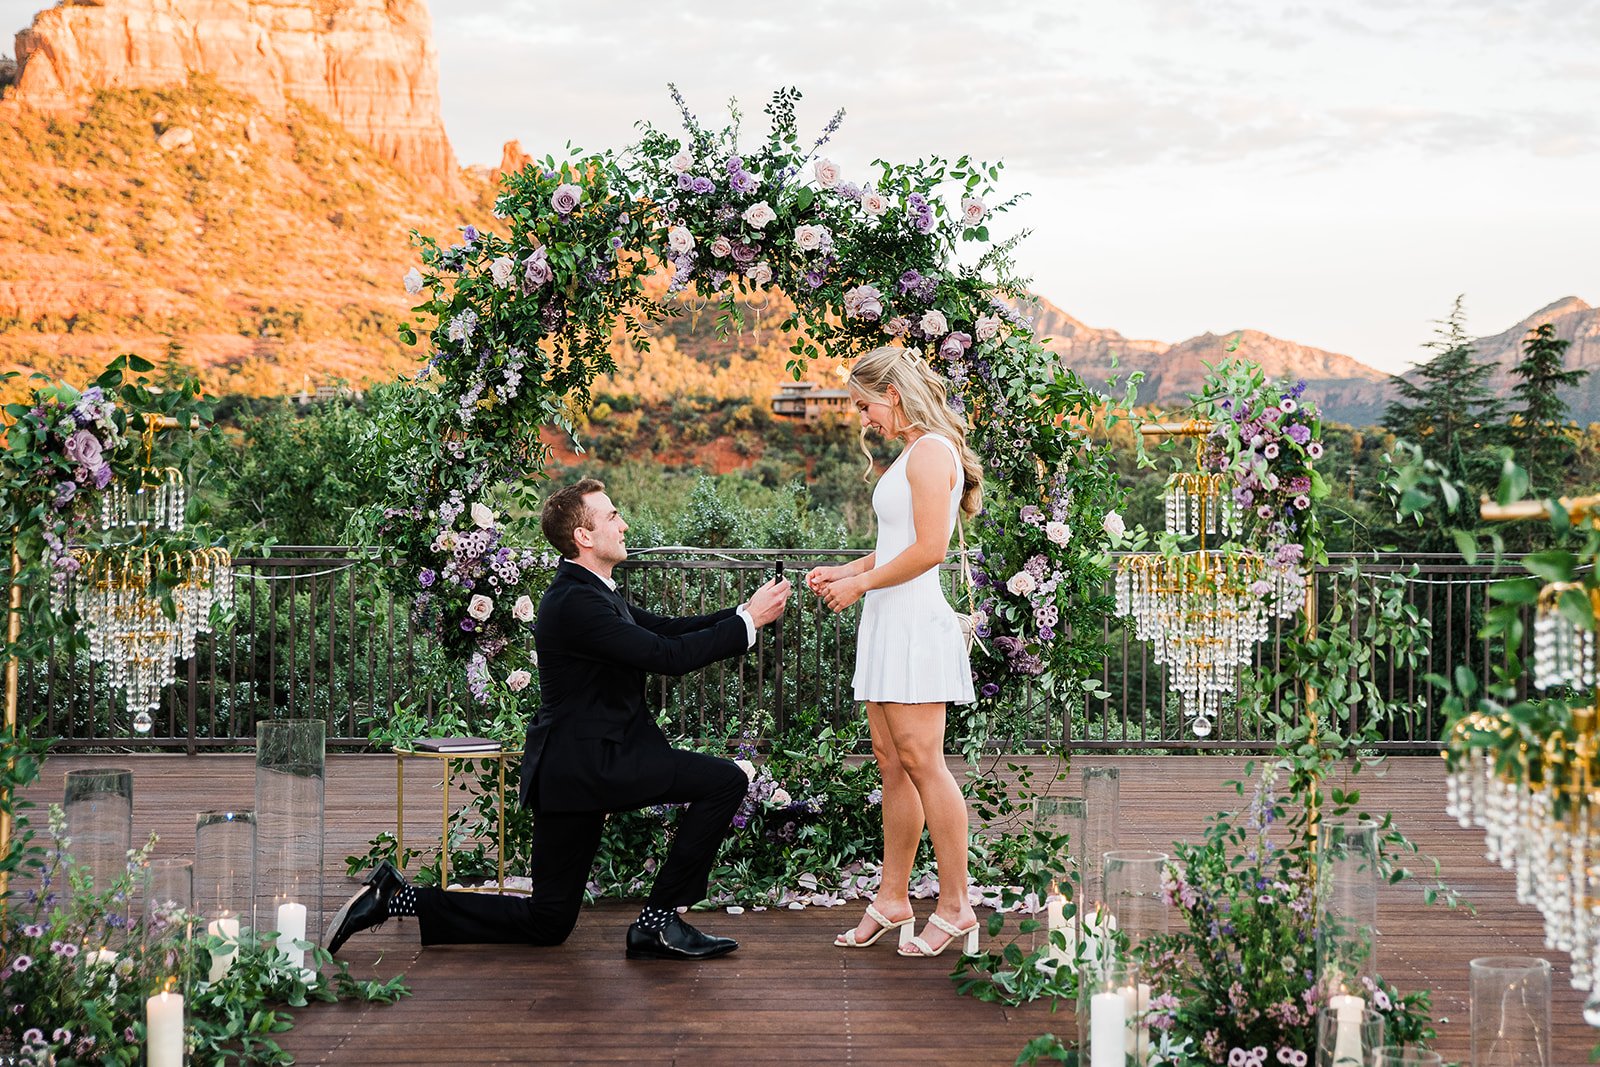 A man in a black suit on one knee proposes with a ring to his girlfriend in a white dress in a mountain park surrounded by romantic florals and decorations